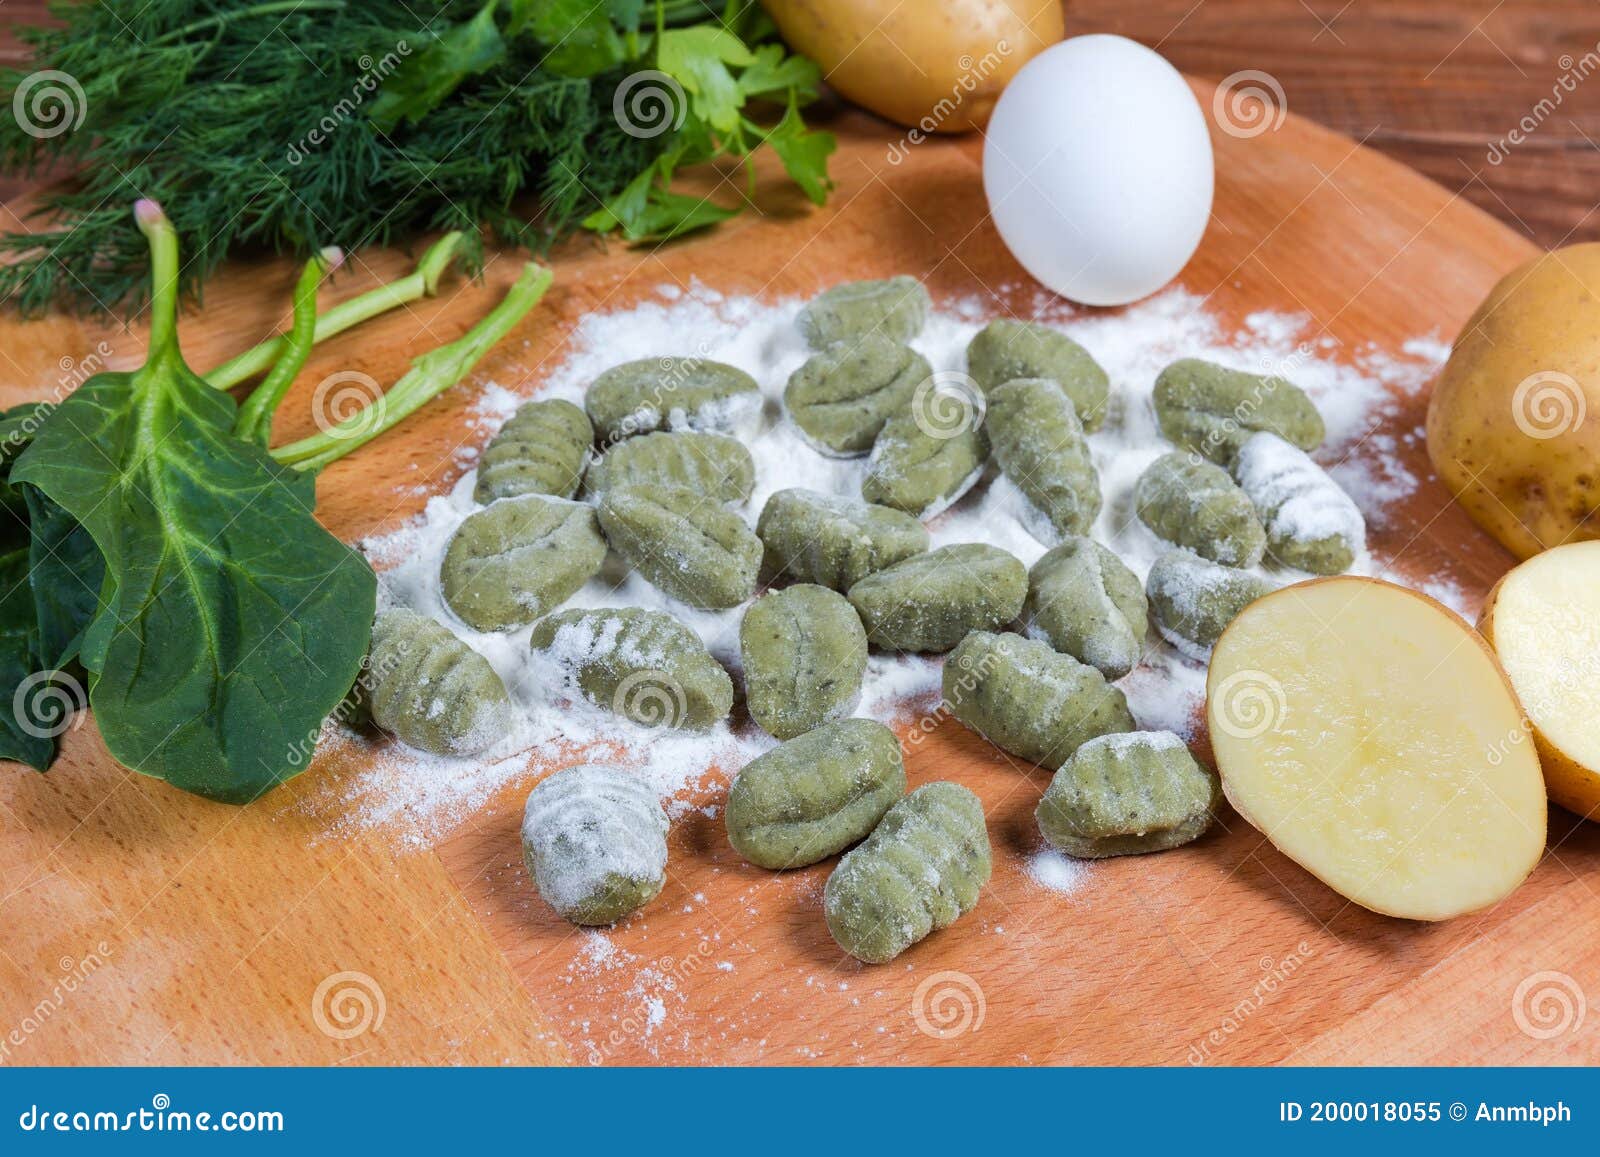 raw potato gnocchi with spinach in flour on wooden board